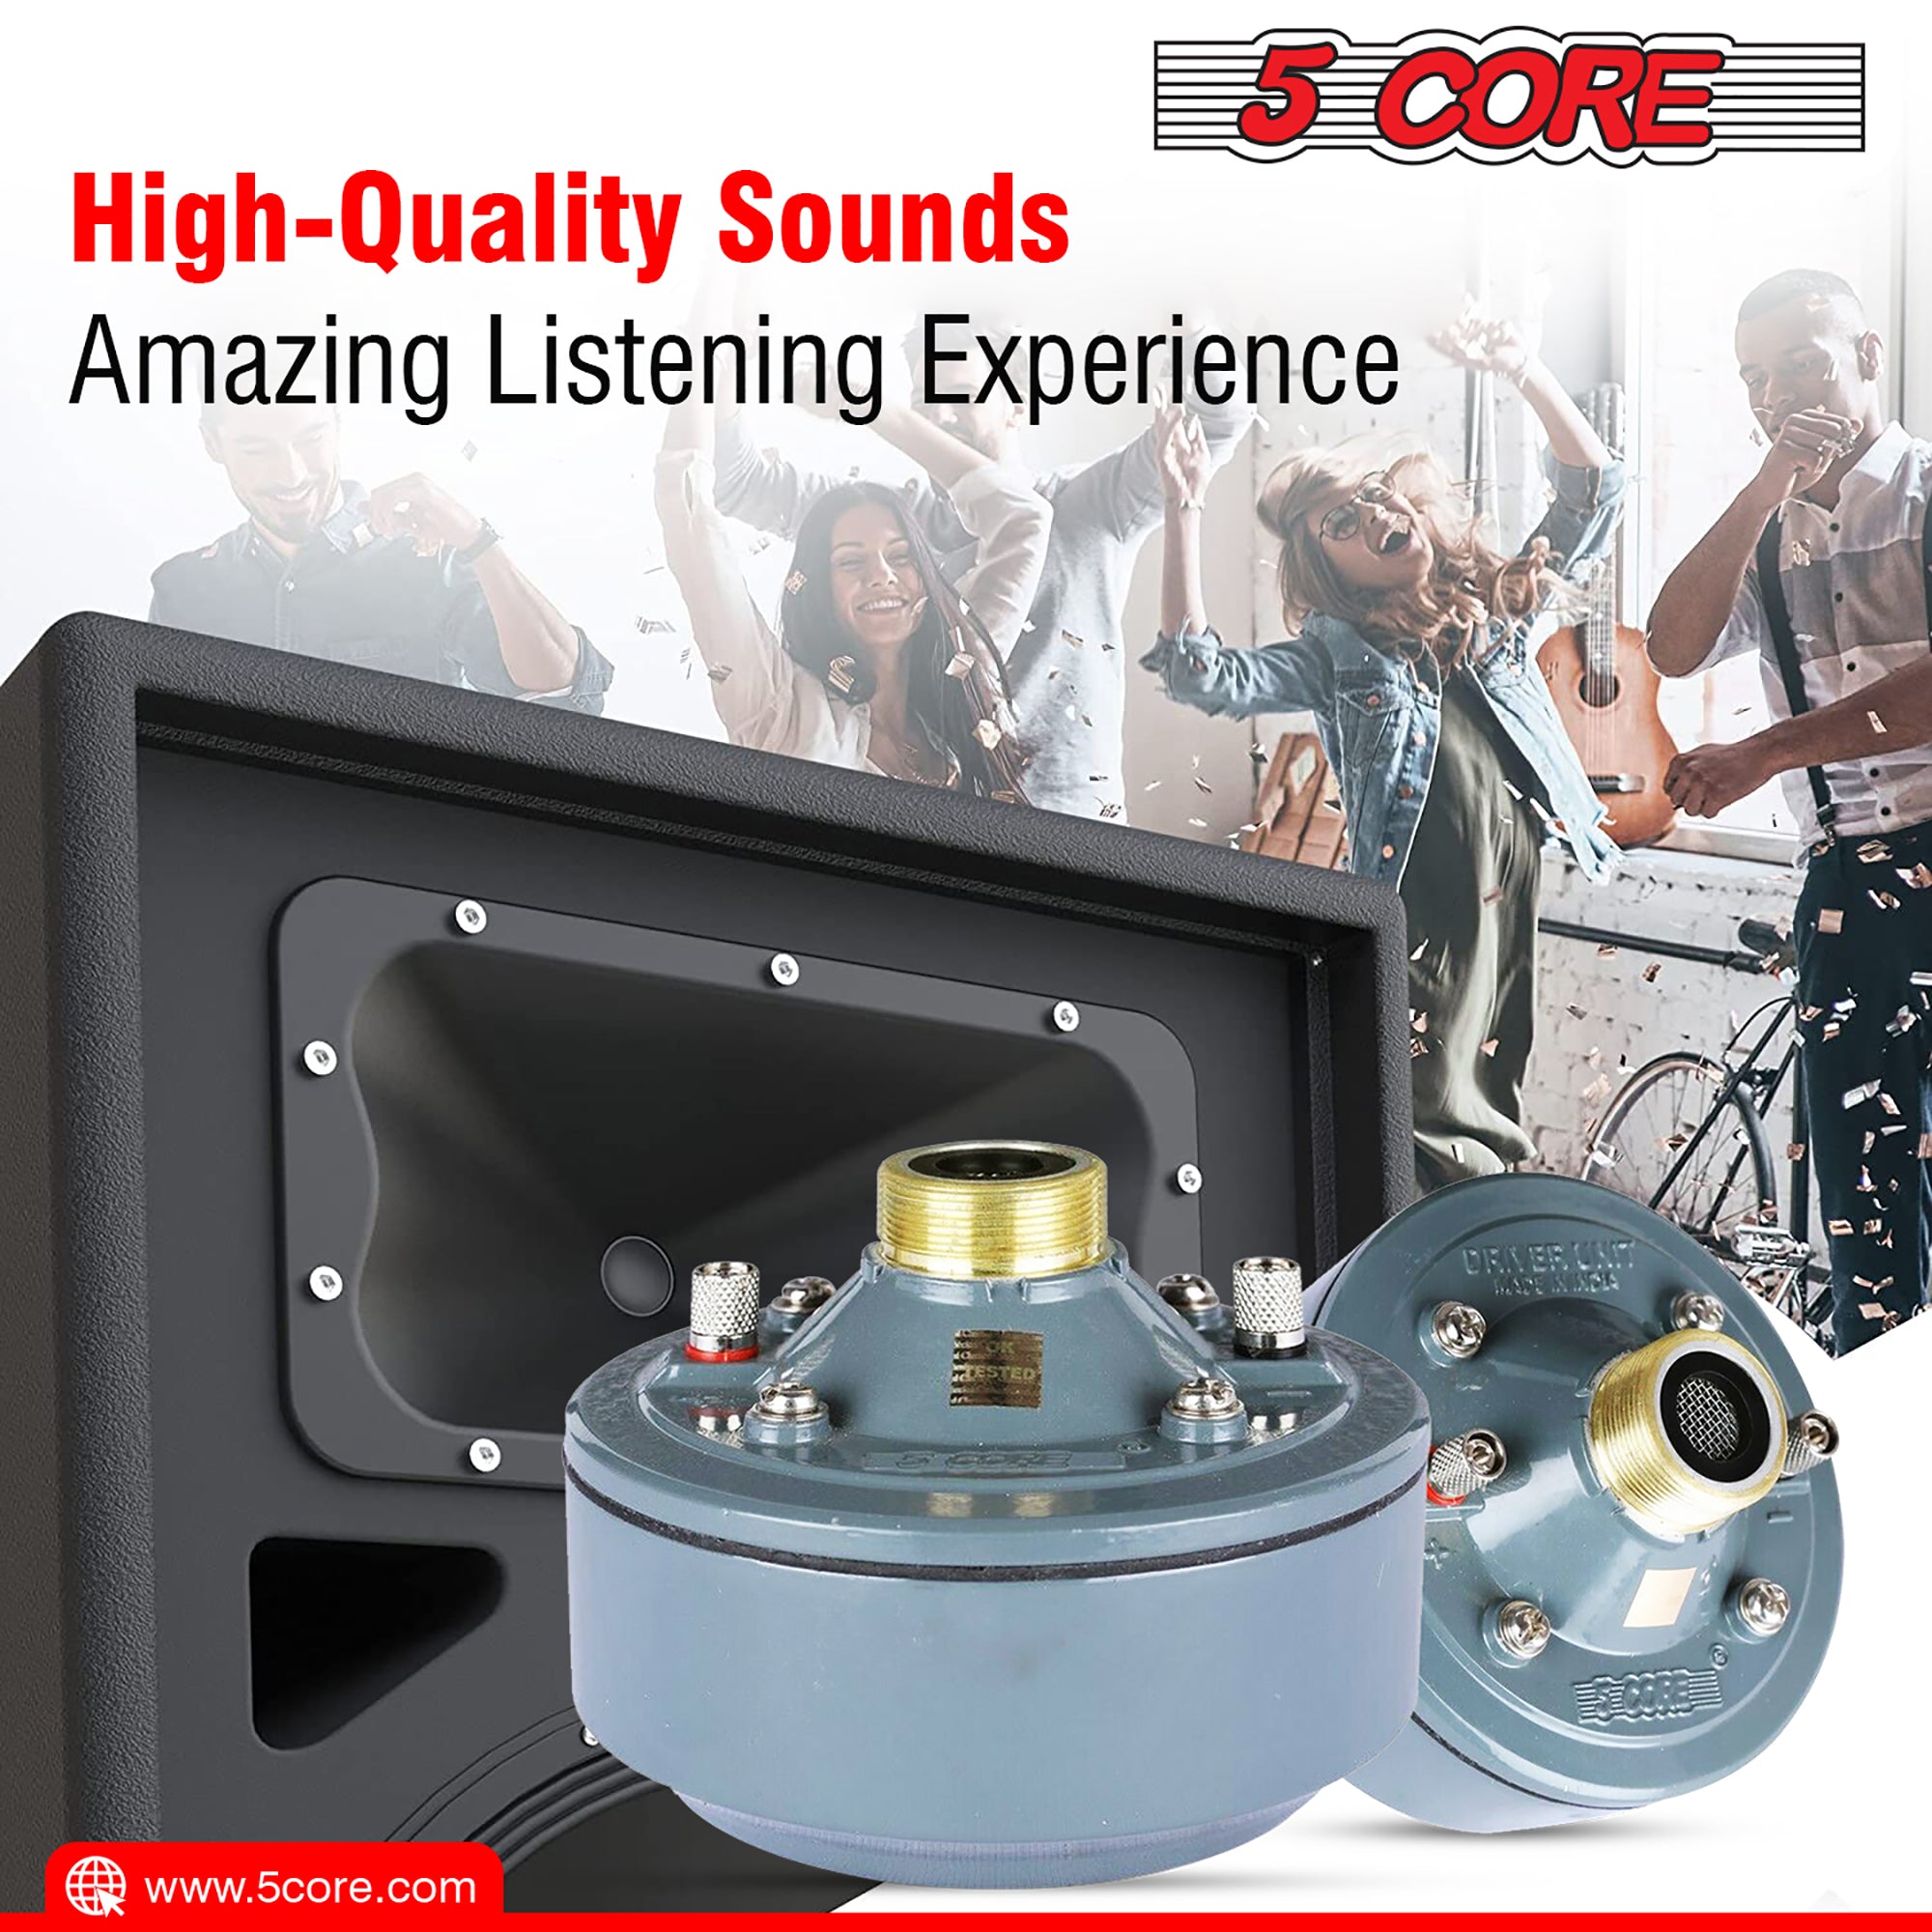 high quality sounds gives by 5 core compression driver